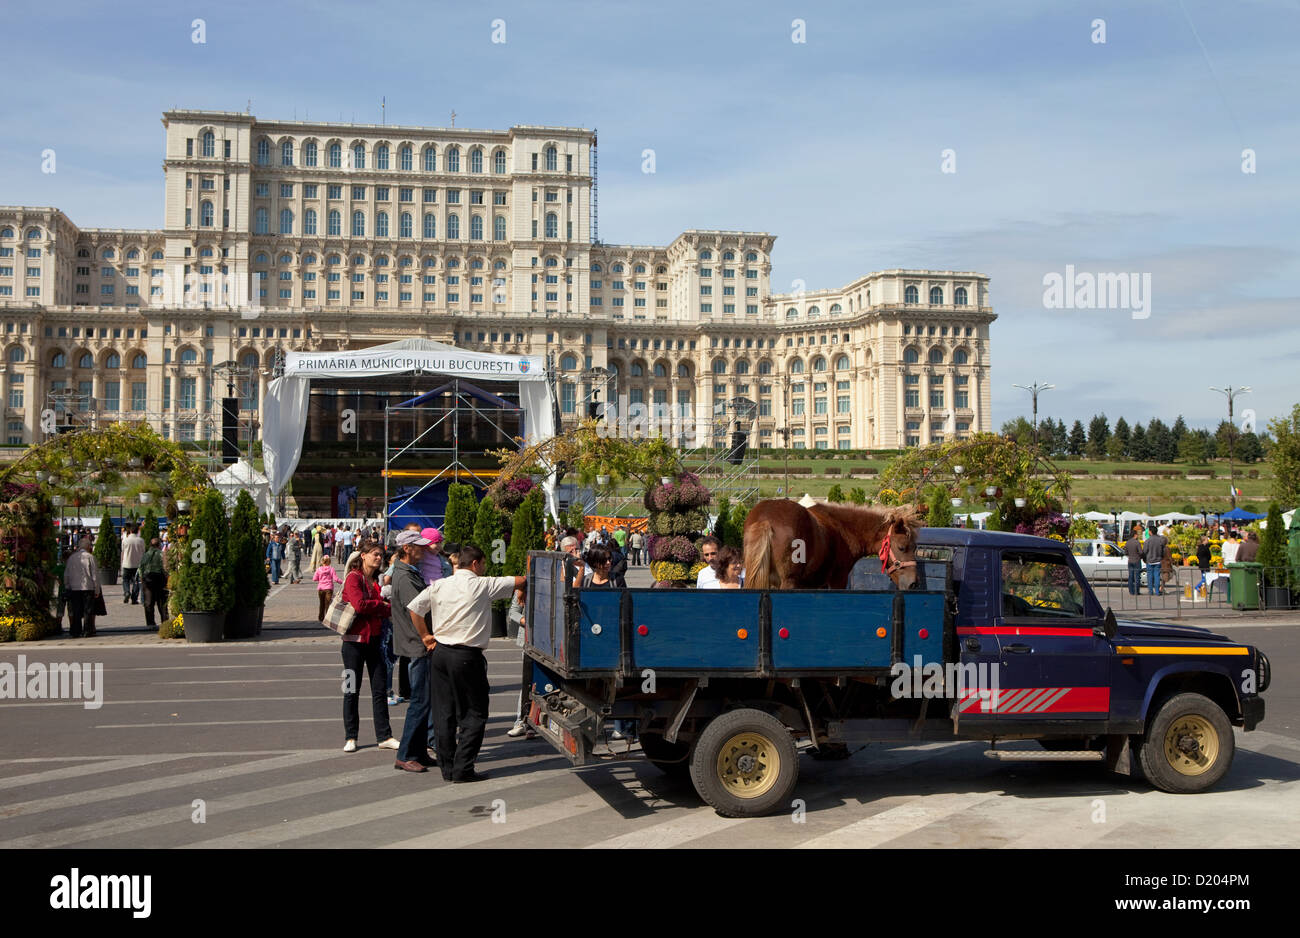 Bucharest, Romania, a vice with bangs before the Parliament Palace Stock Photo